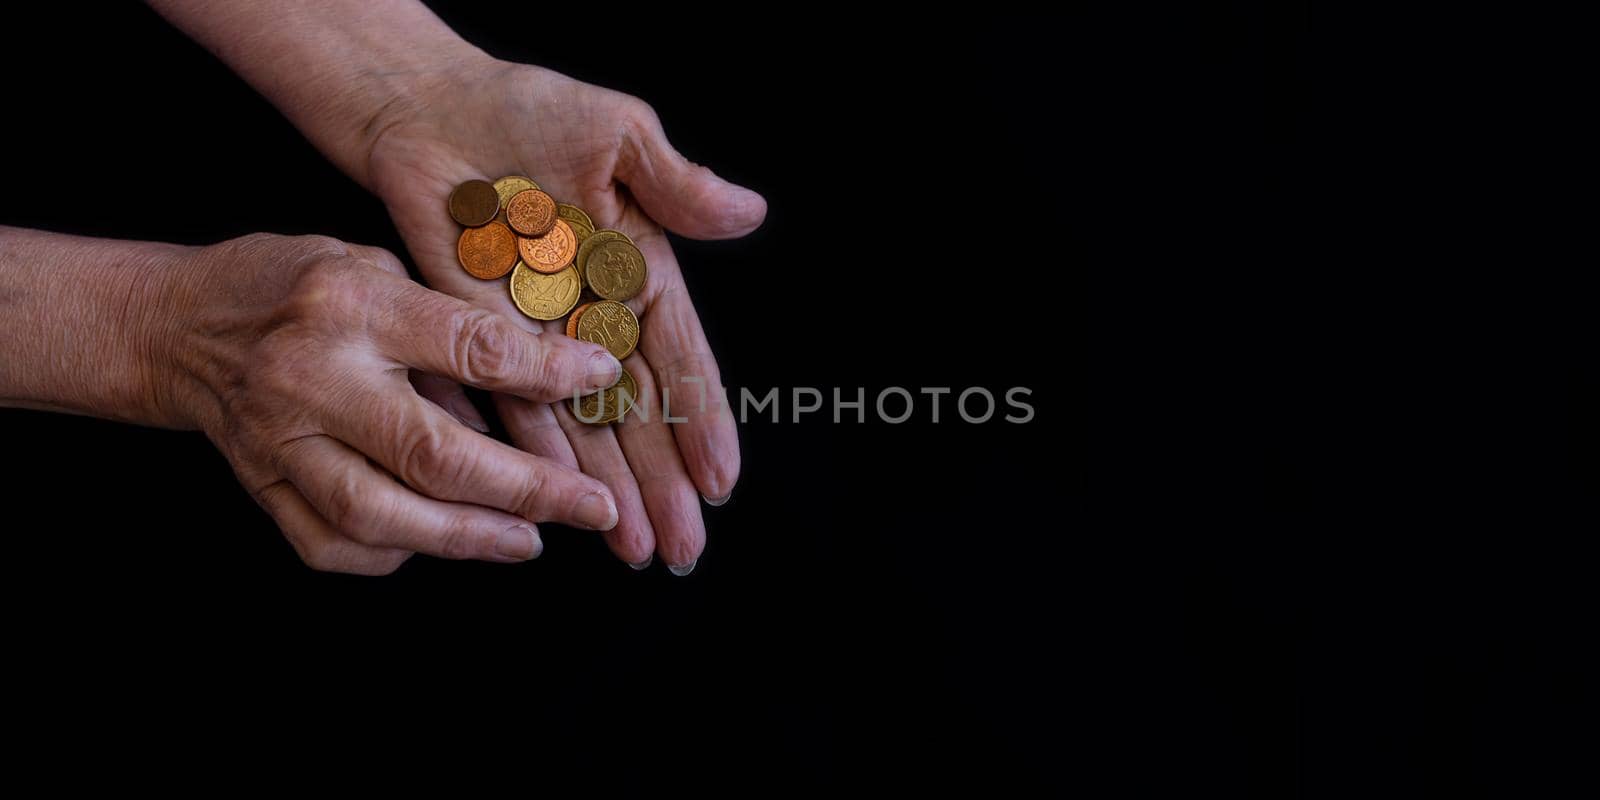 Women's hands close-up counting coins in the palms. Copy paste, black background by Ramanouskaya